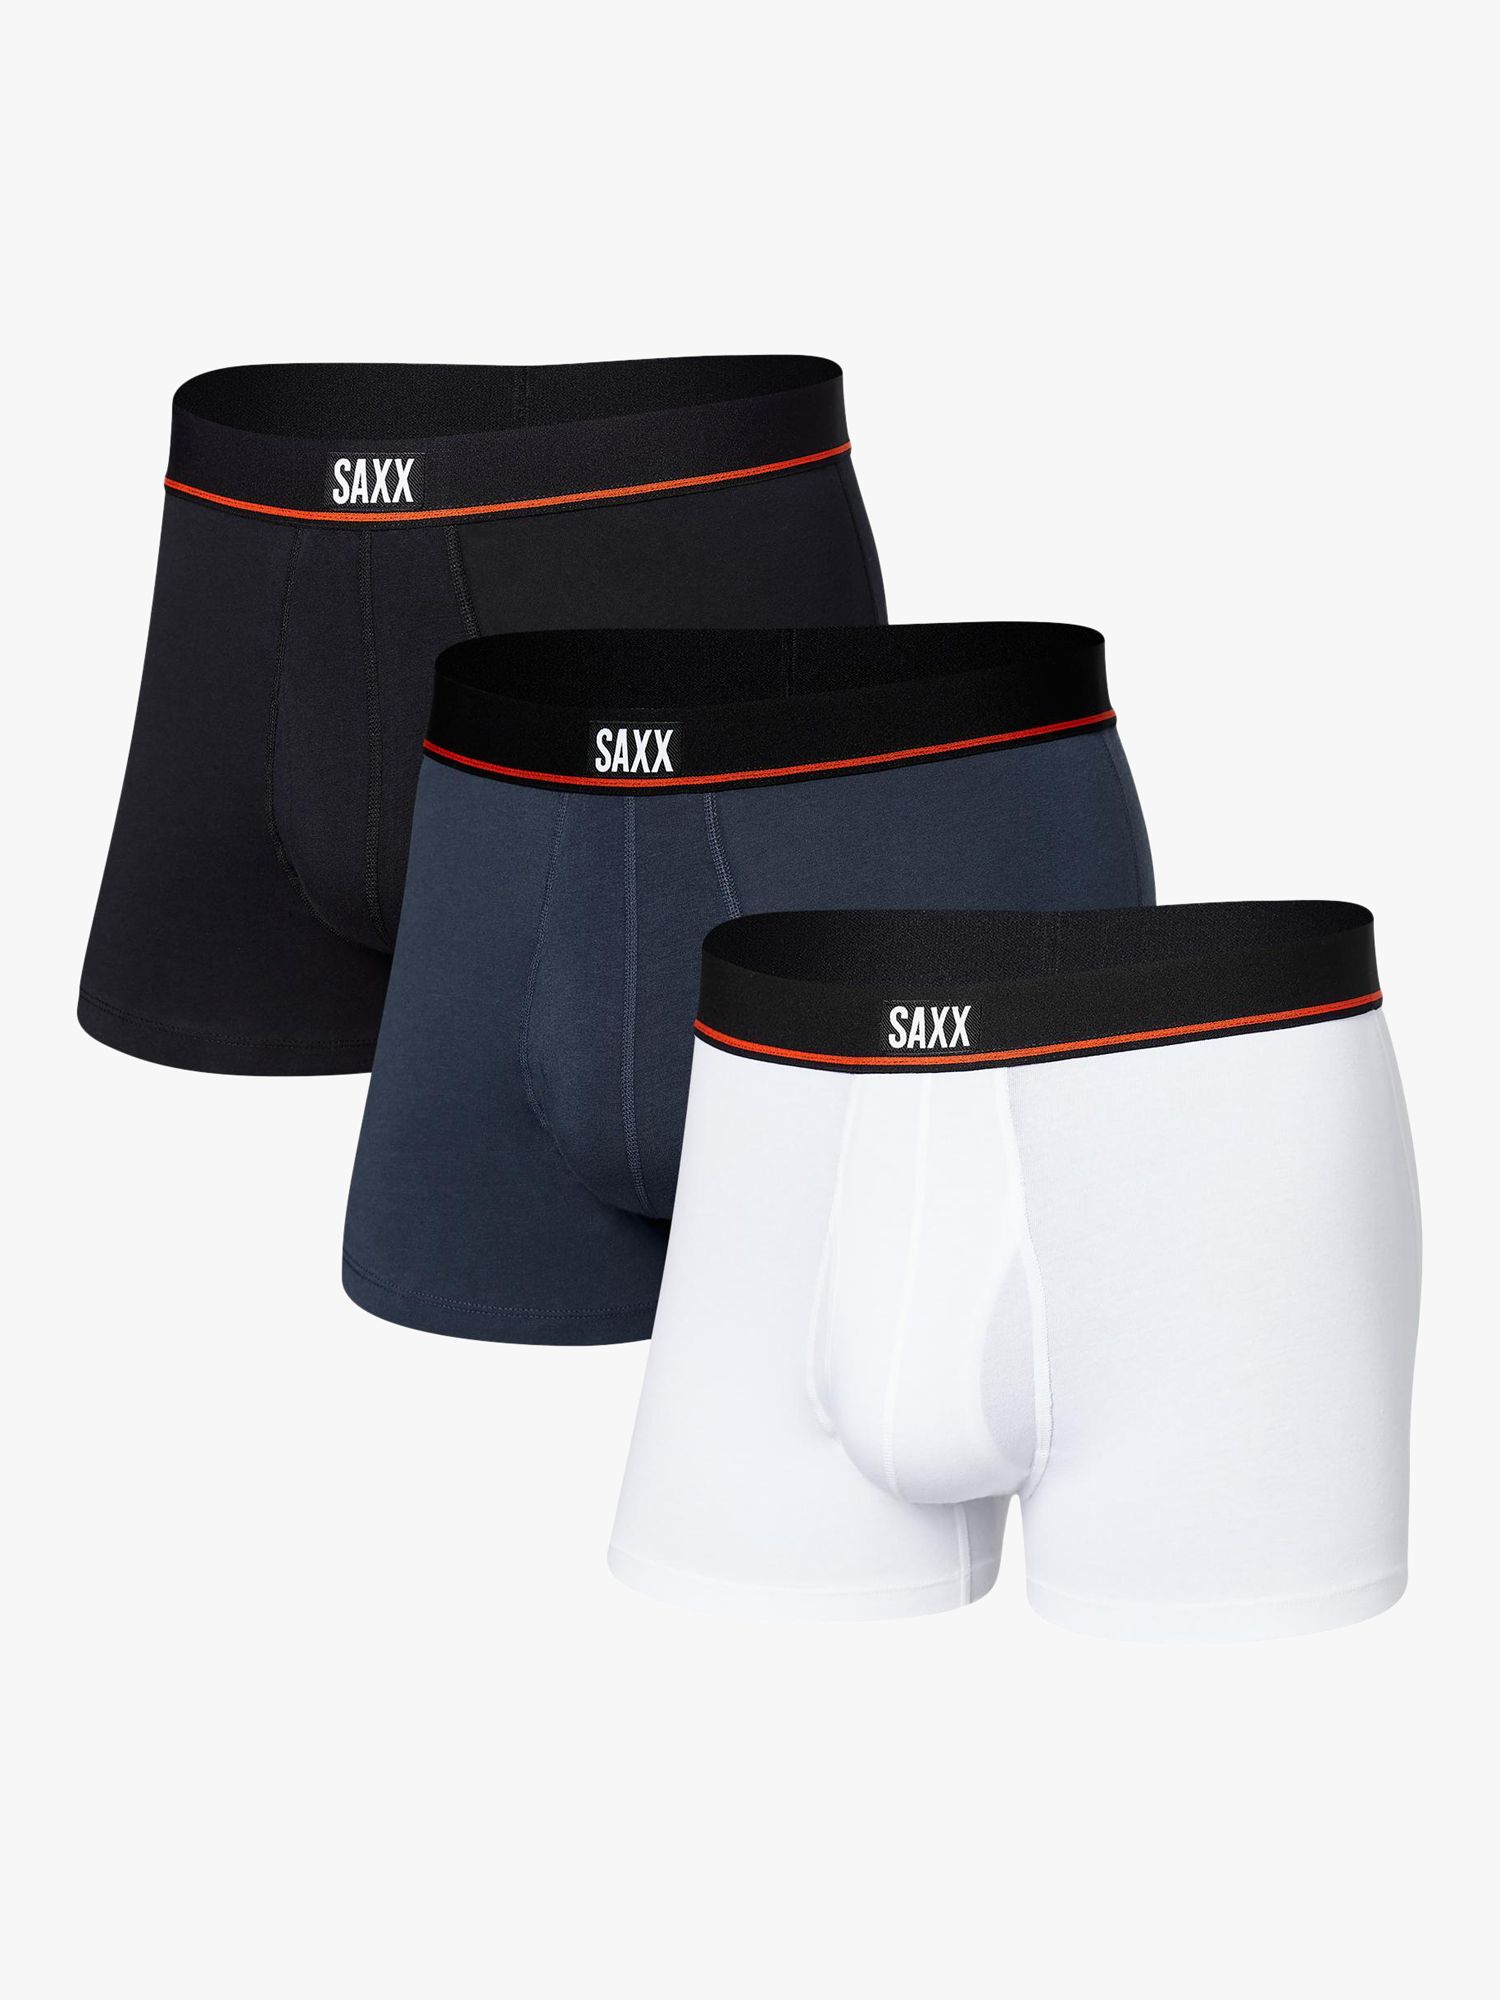 SAXX Non Stop Relaxed Fit Trunks, Pack of 3, Black/Navy/White, S